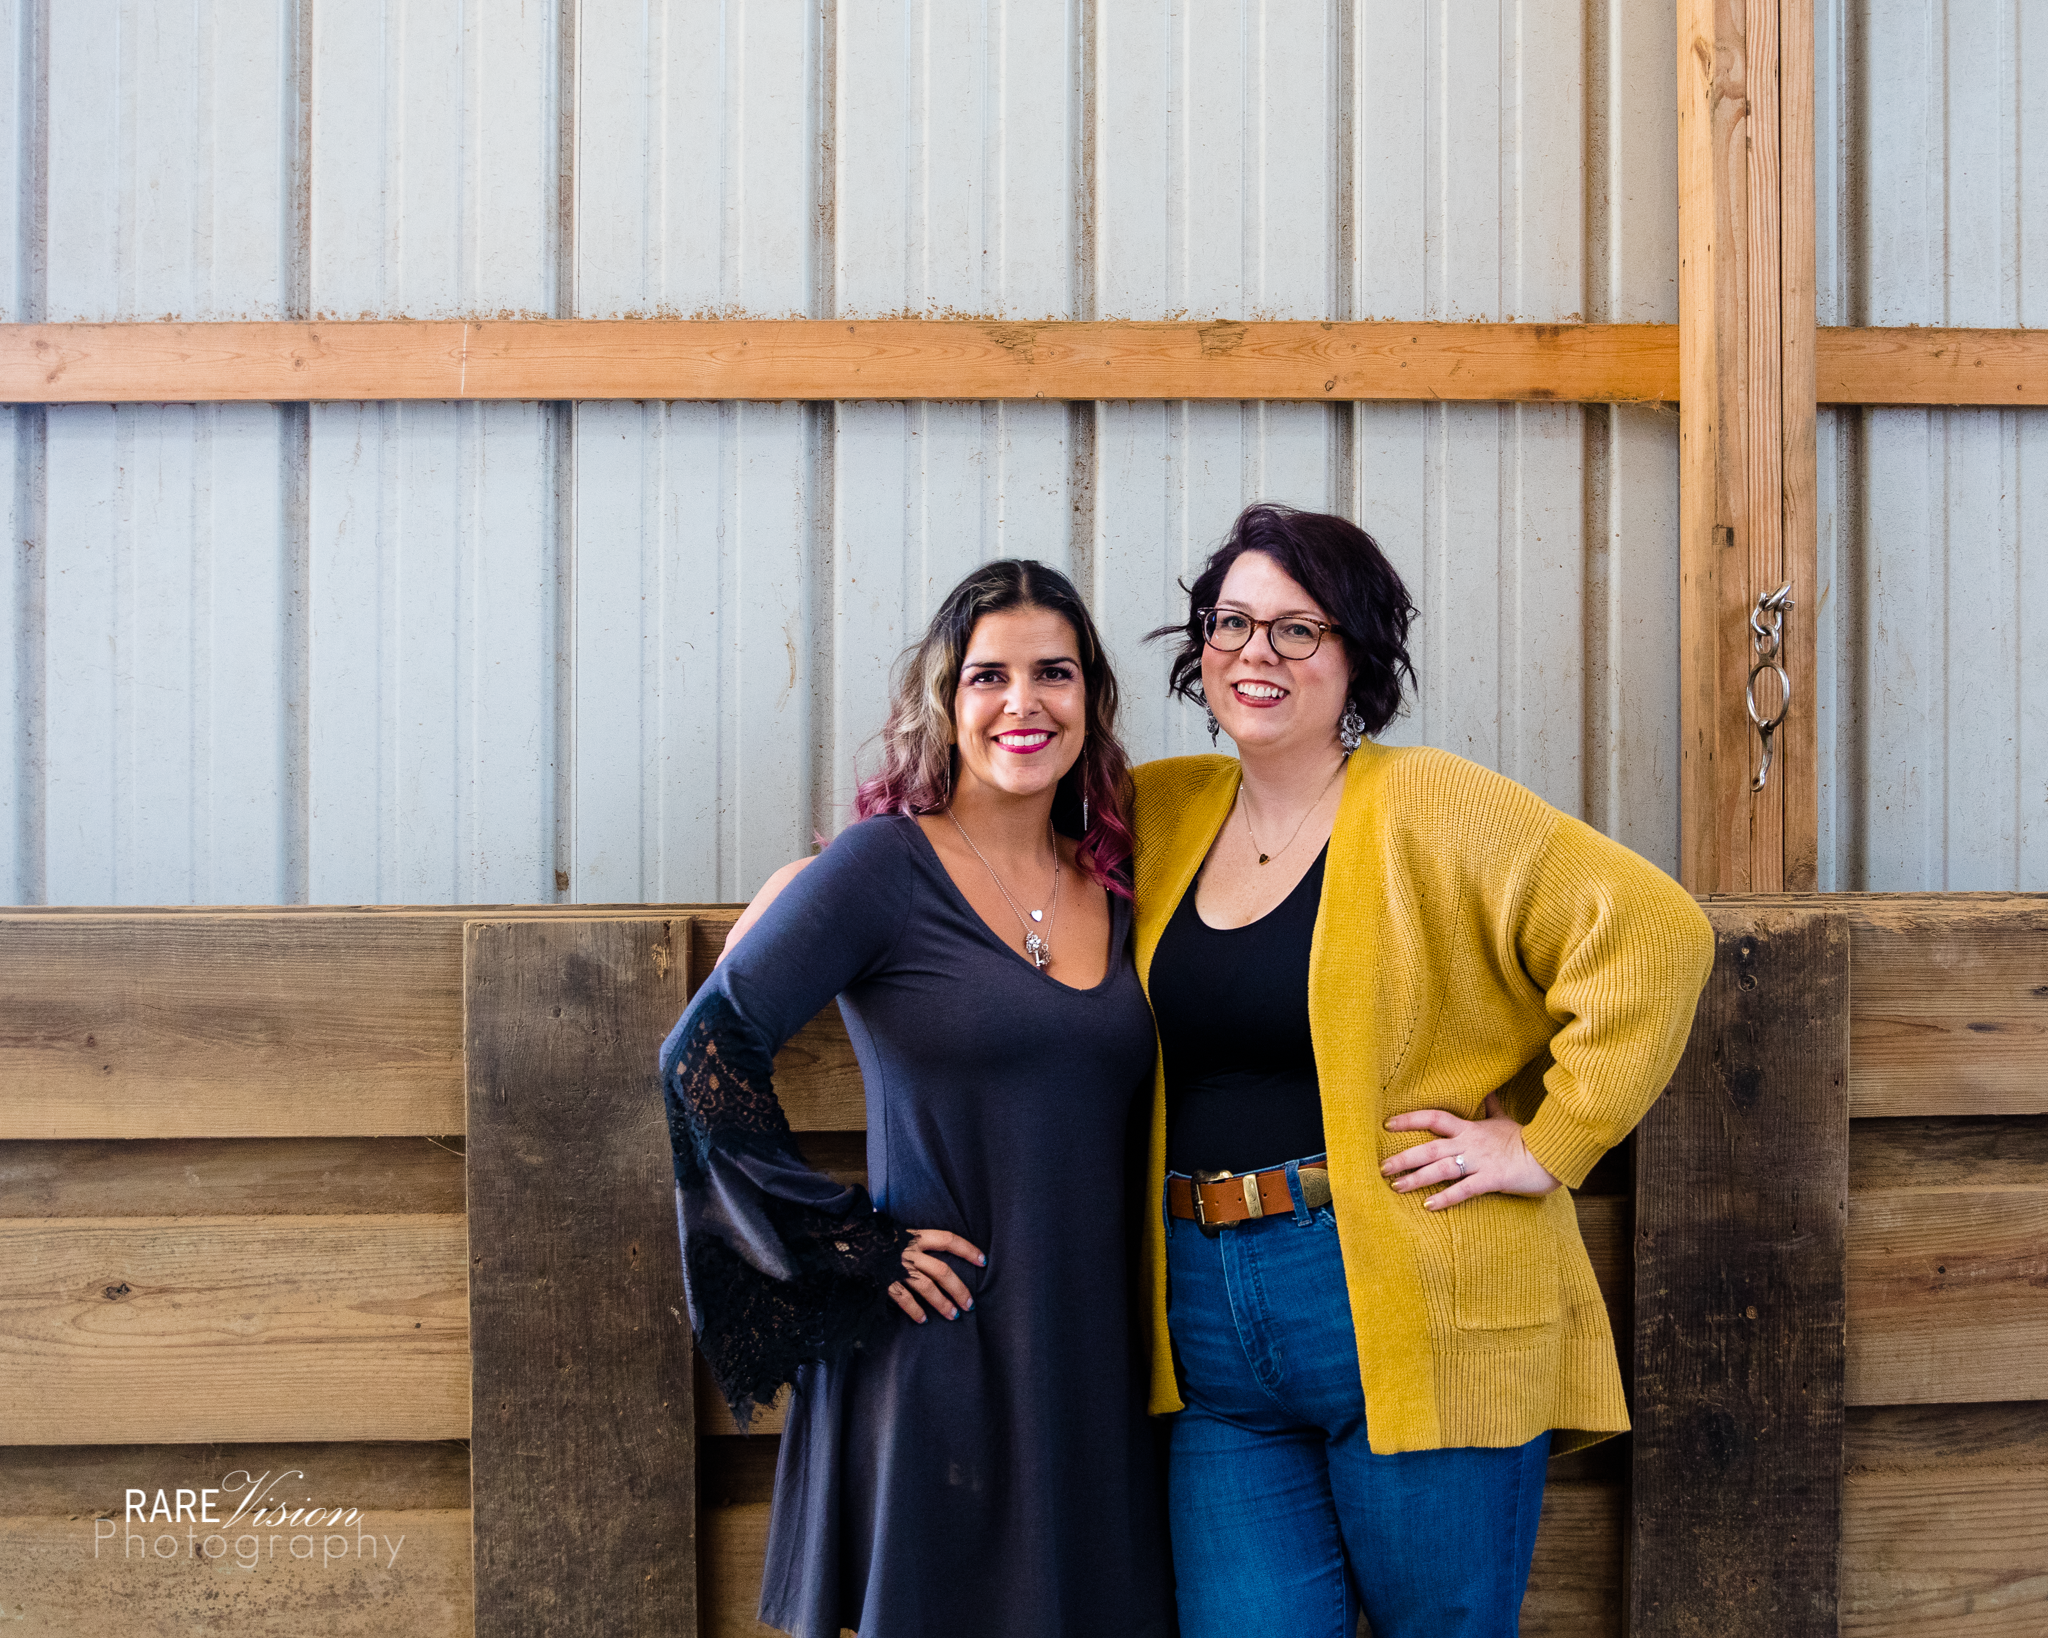 Janine Kenna and Heather Compton, owners of Kindhearted Badass